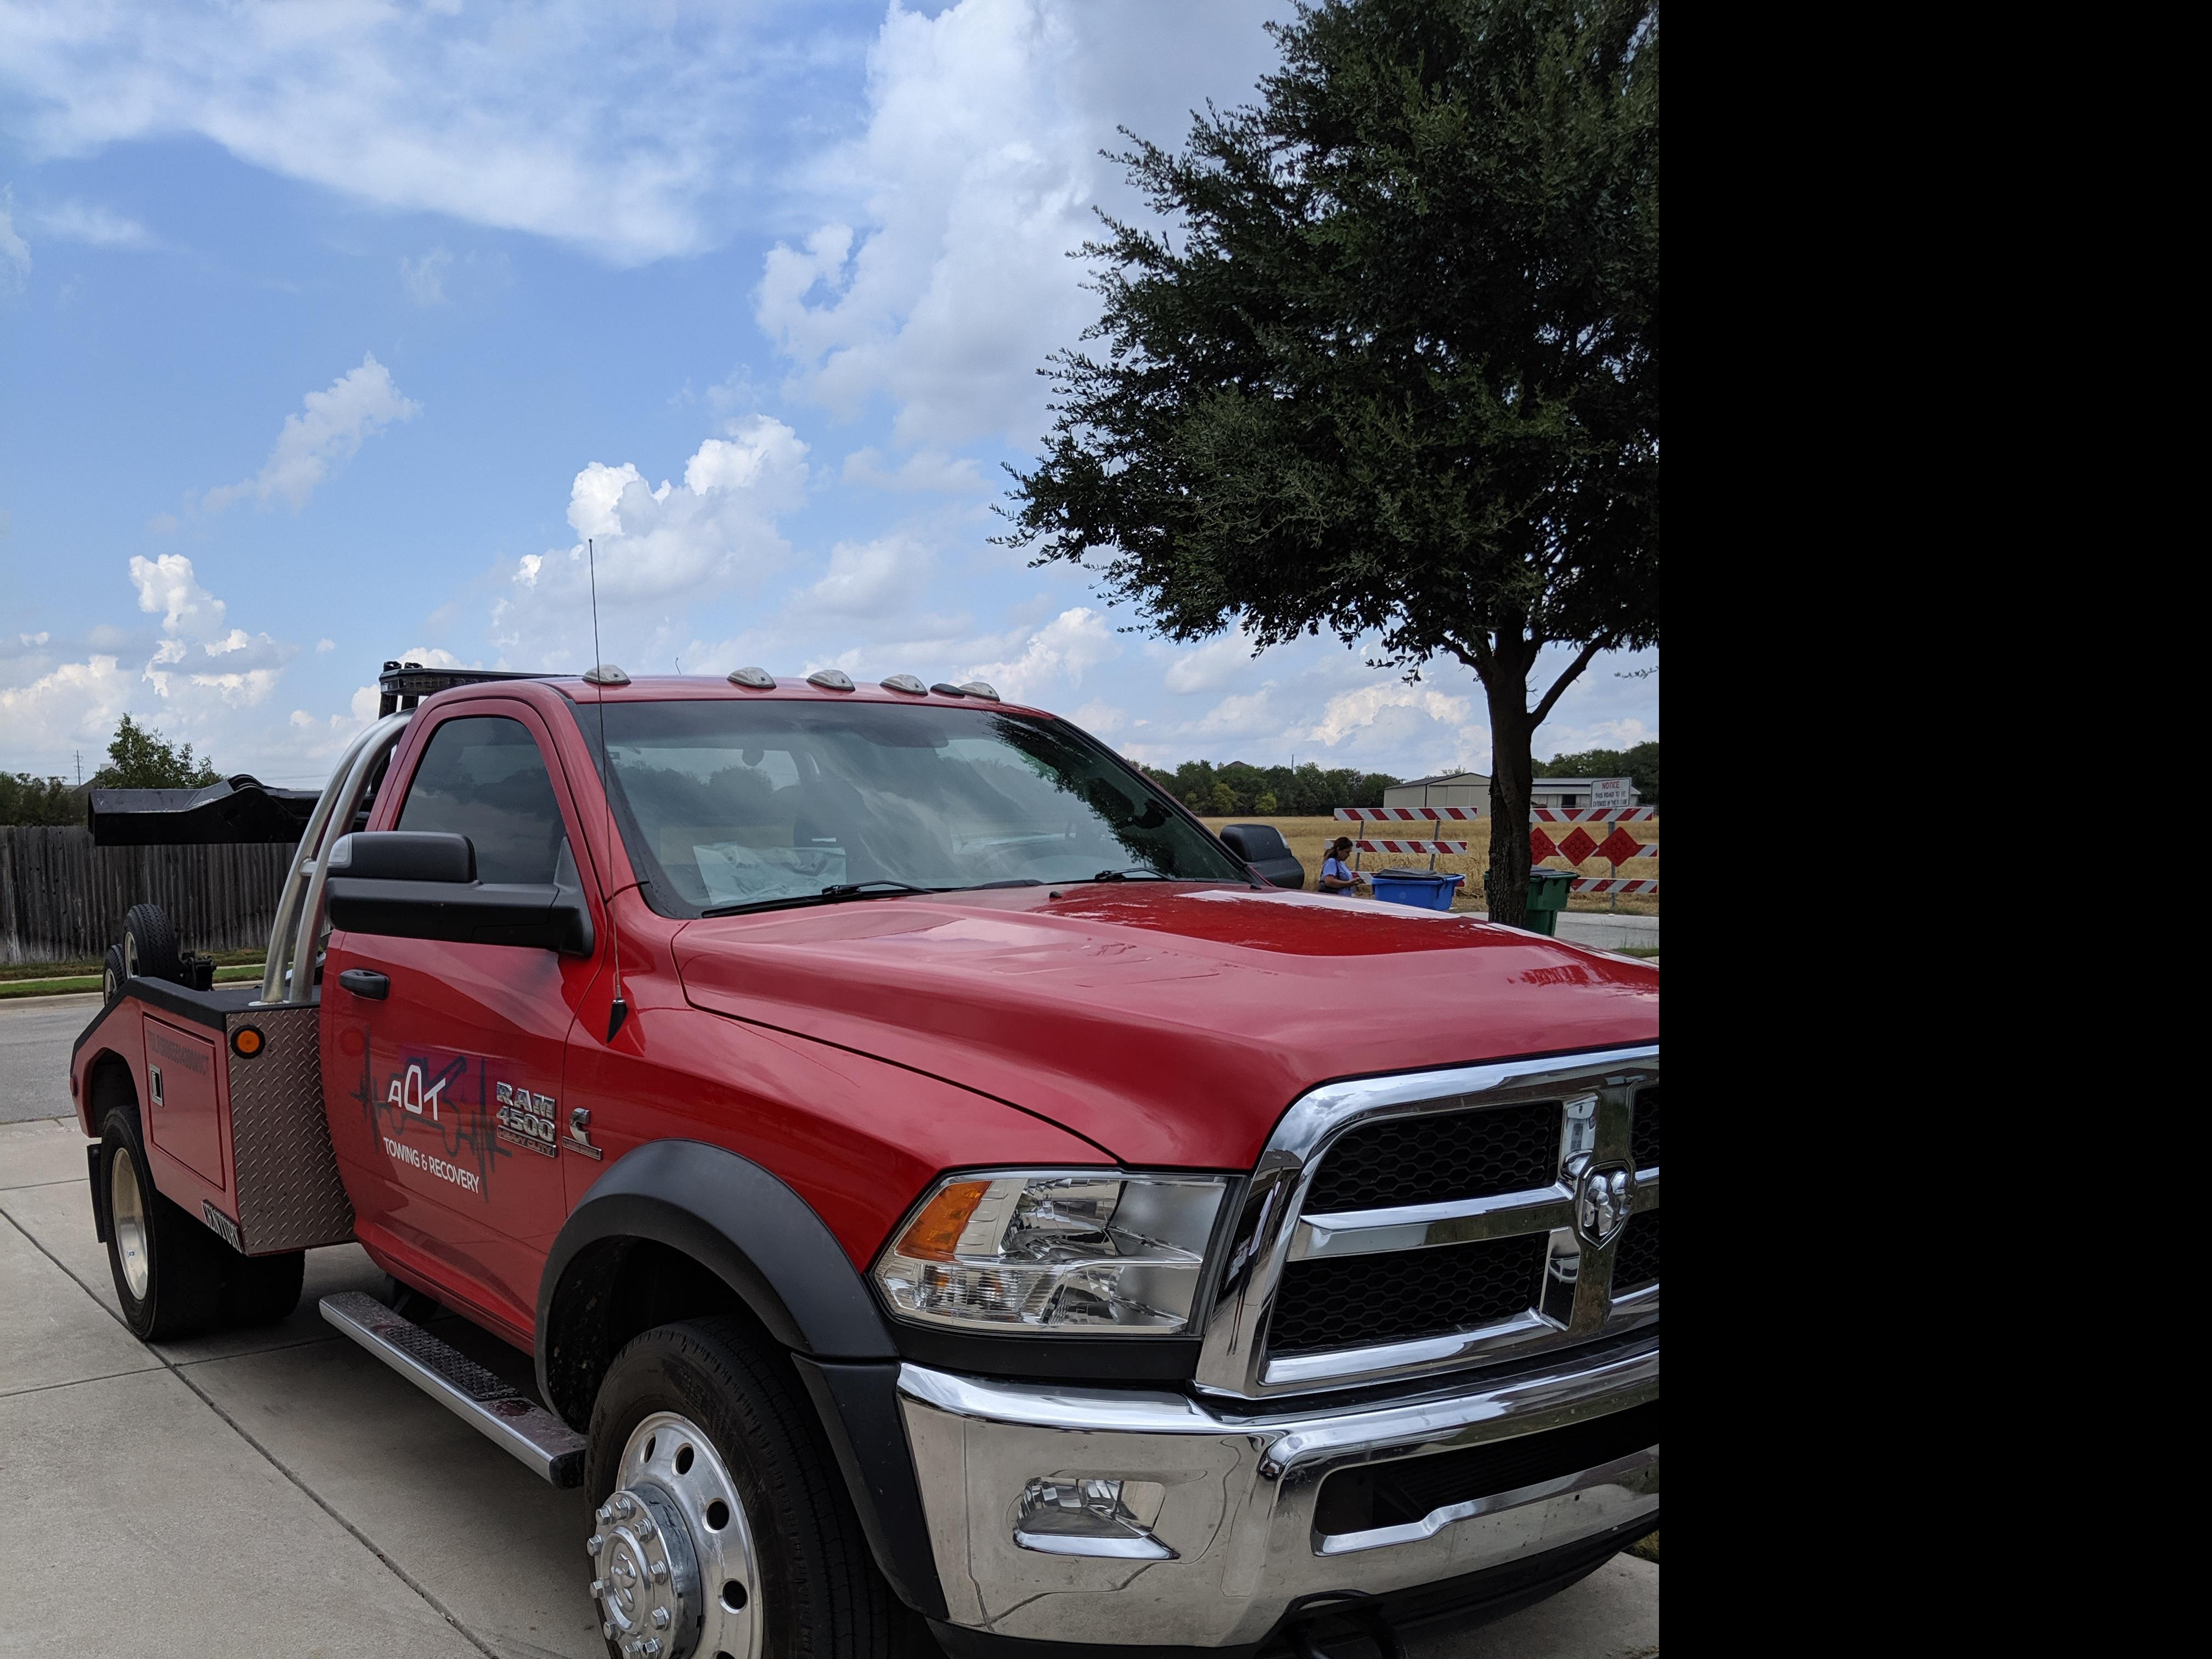 All Over Texas Towing & Recovery Photo